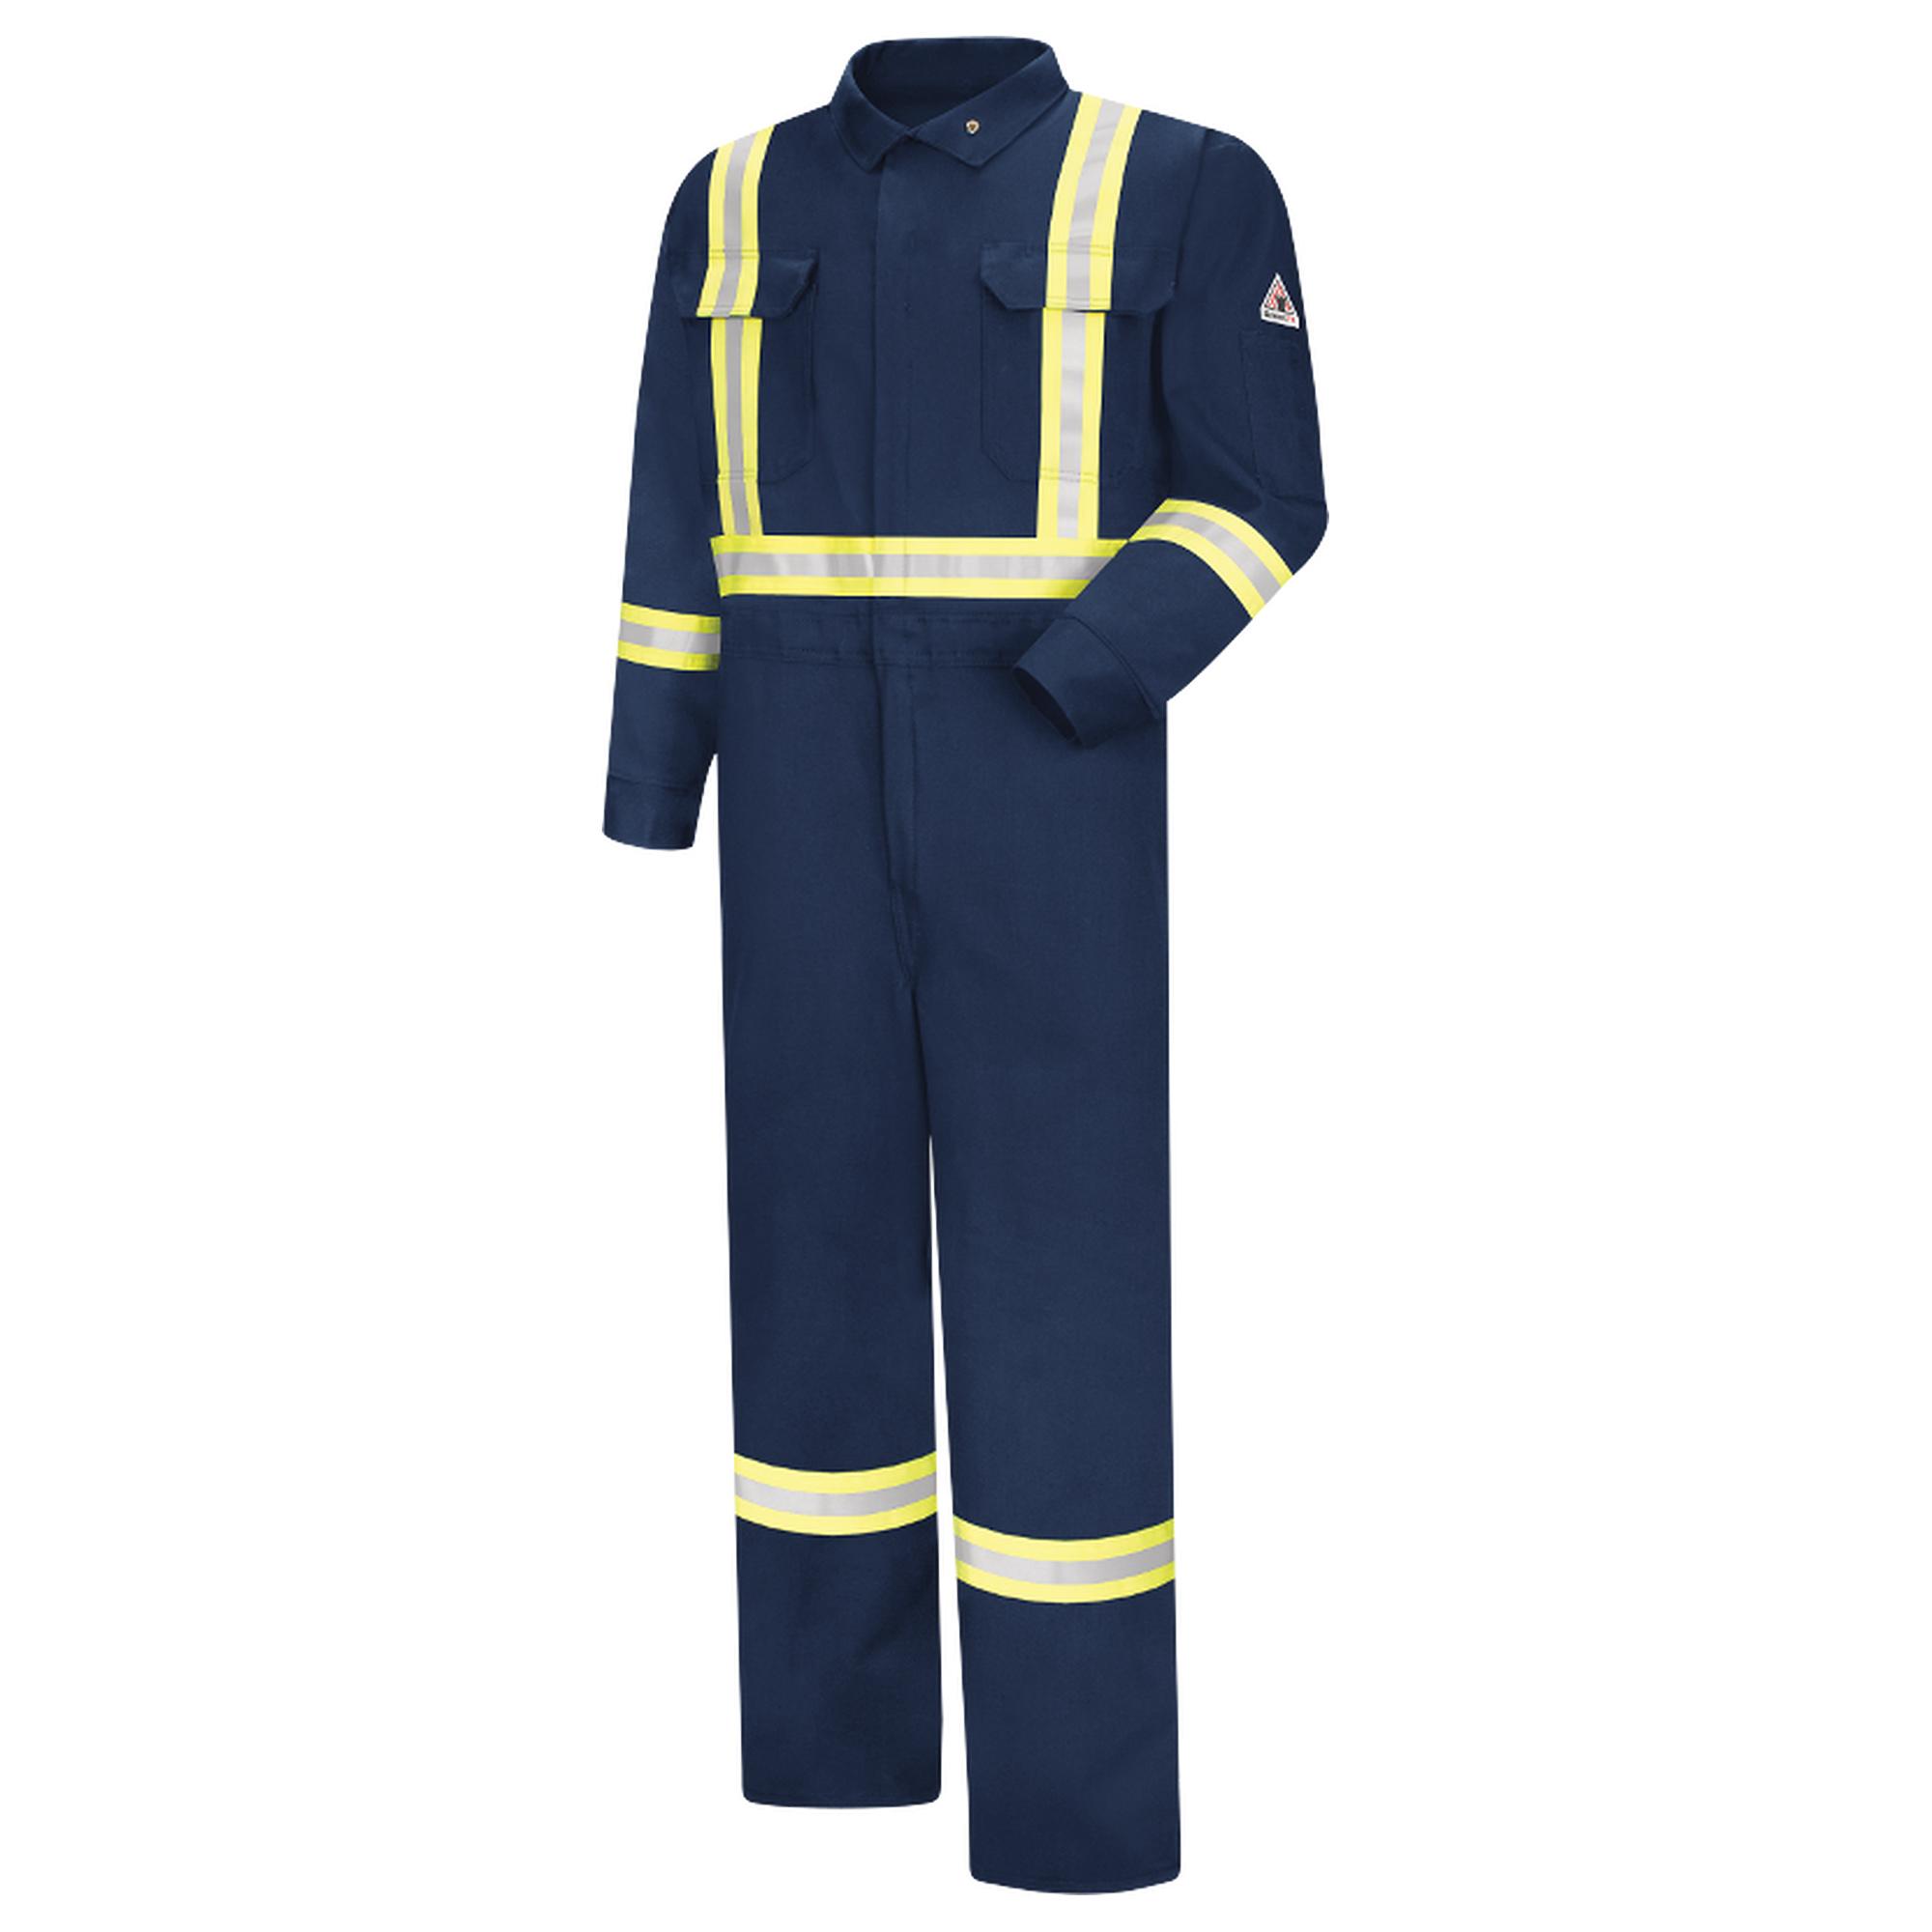 PRODUCTS: 7 oz. AR/FR Cotton Coverall with Reflective FR Tape, Stone Khaki